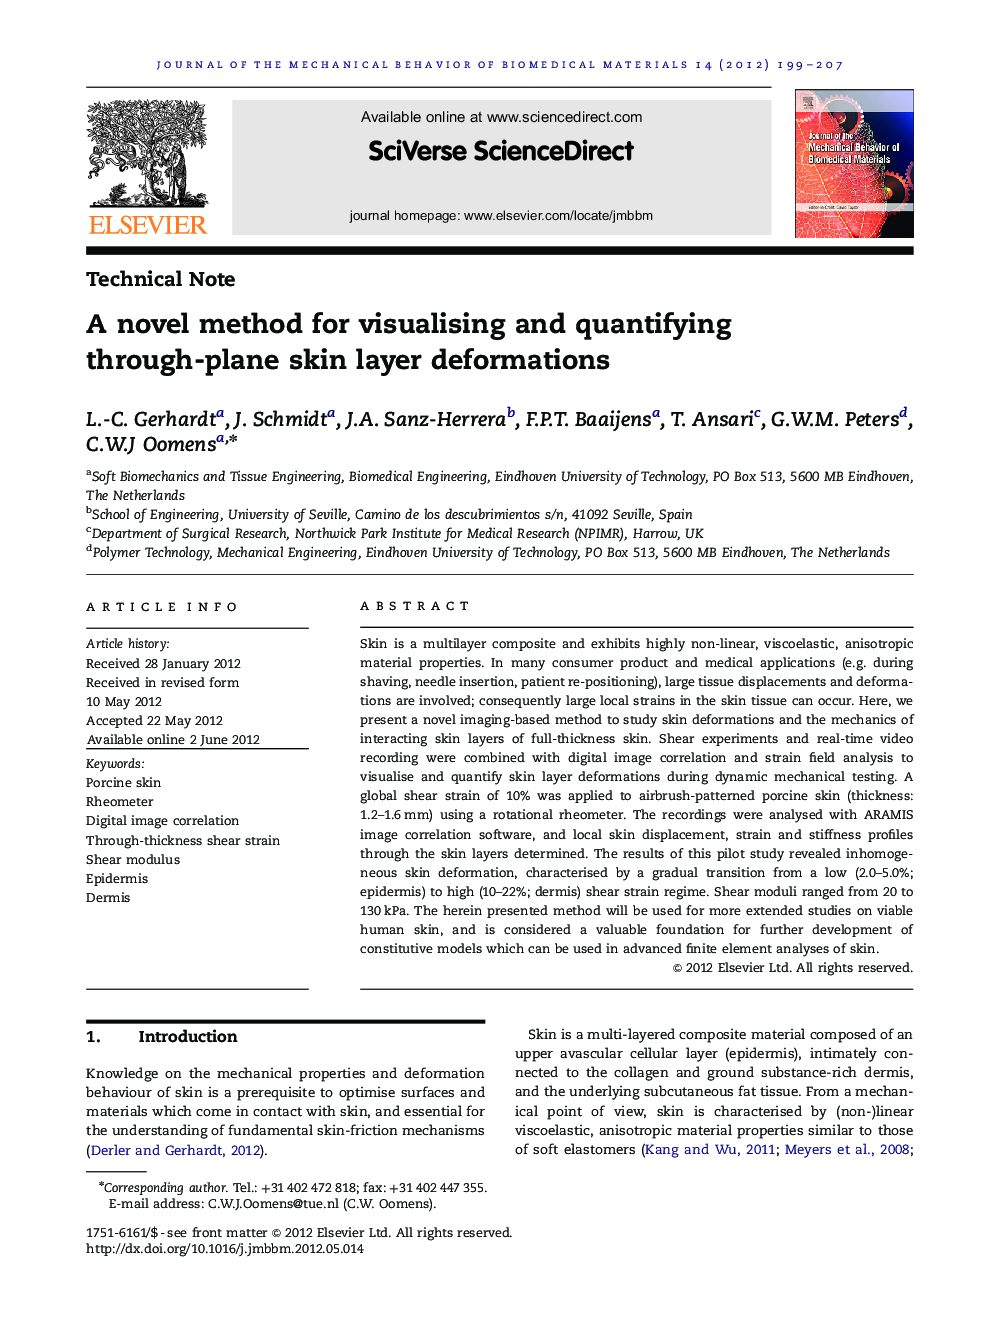 A novel method for visualising and quantifying through-plane skin layer deformations